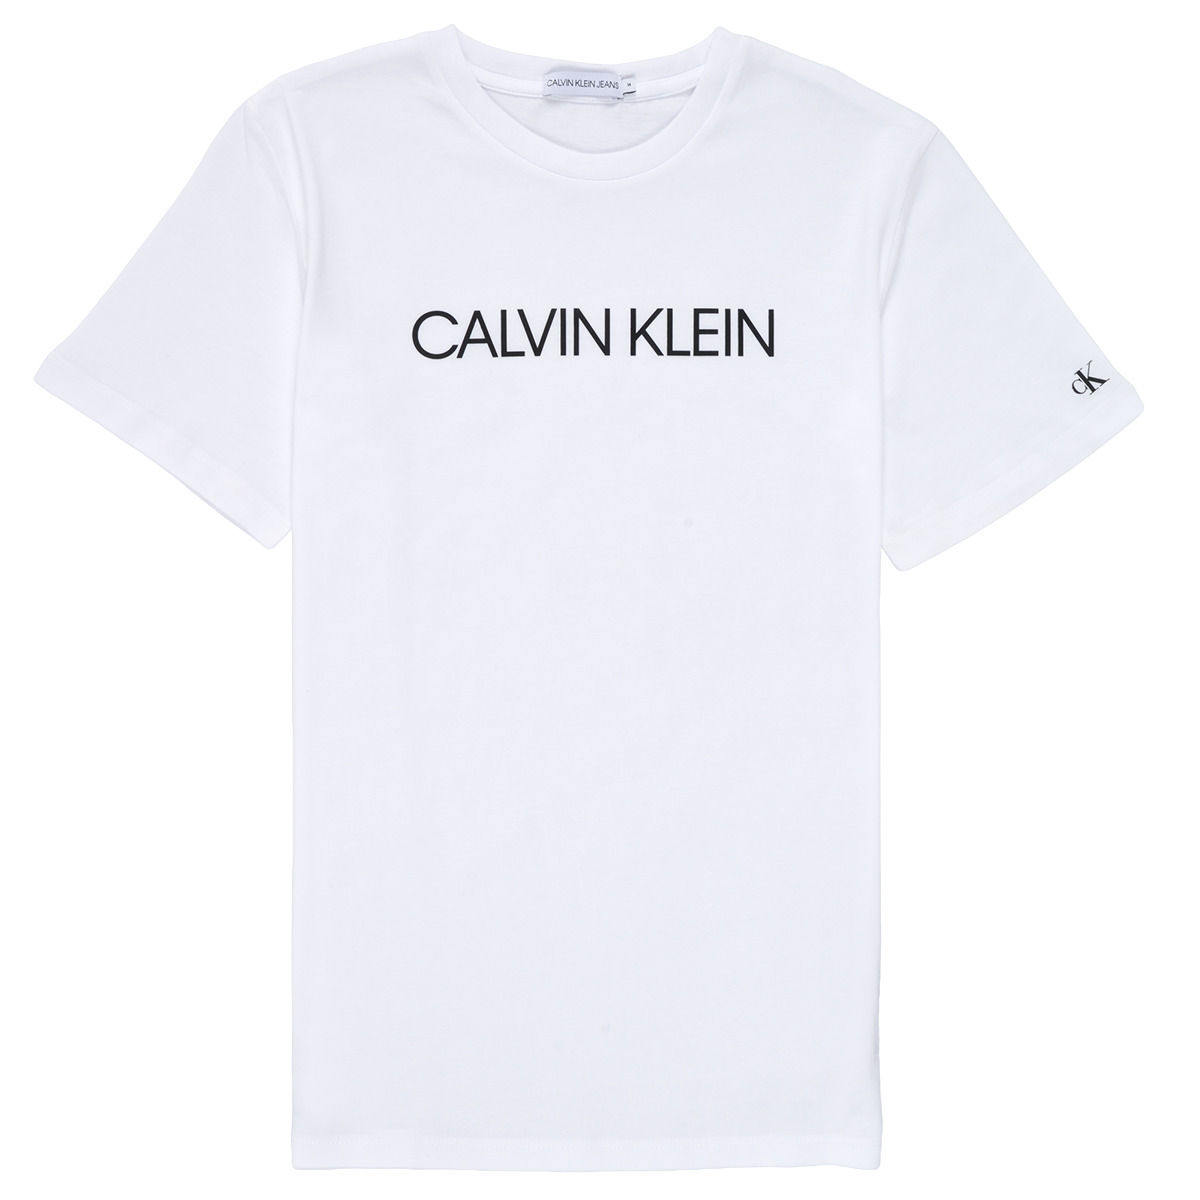 Calvin Klein Jeans INSTITUTIONAL T-SHIRT White - Free delivery